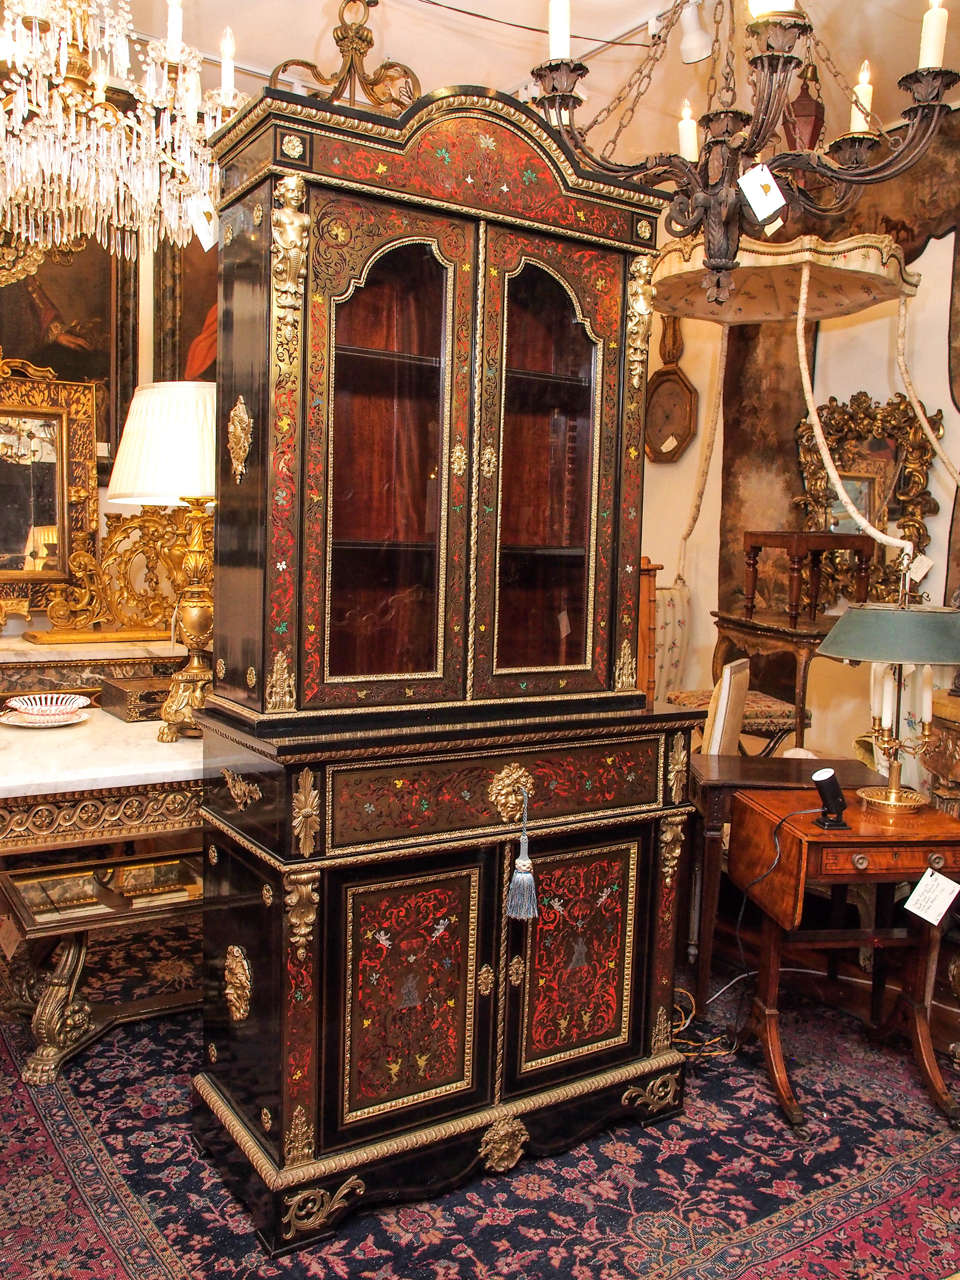 French Napoleon III Boulle style secretaire bookcase with a 